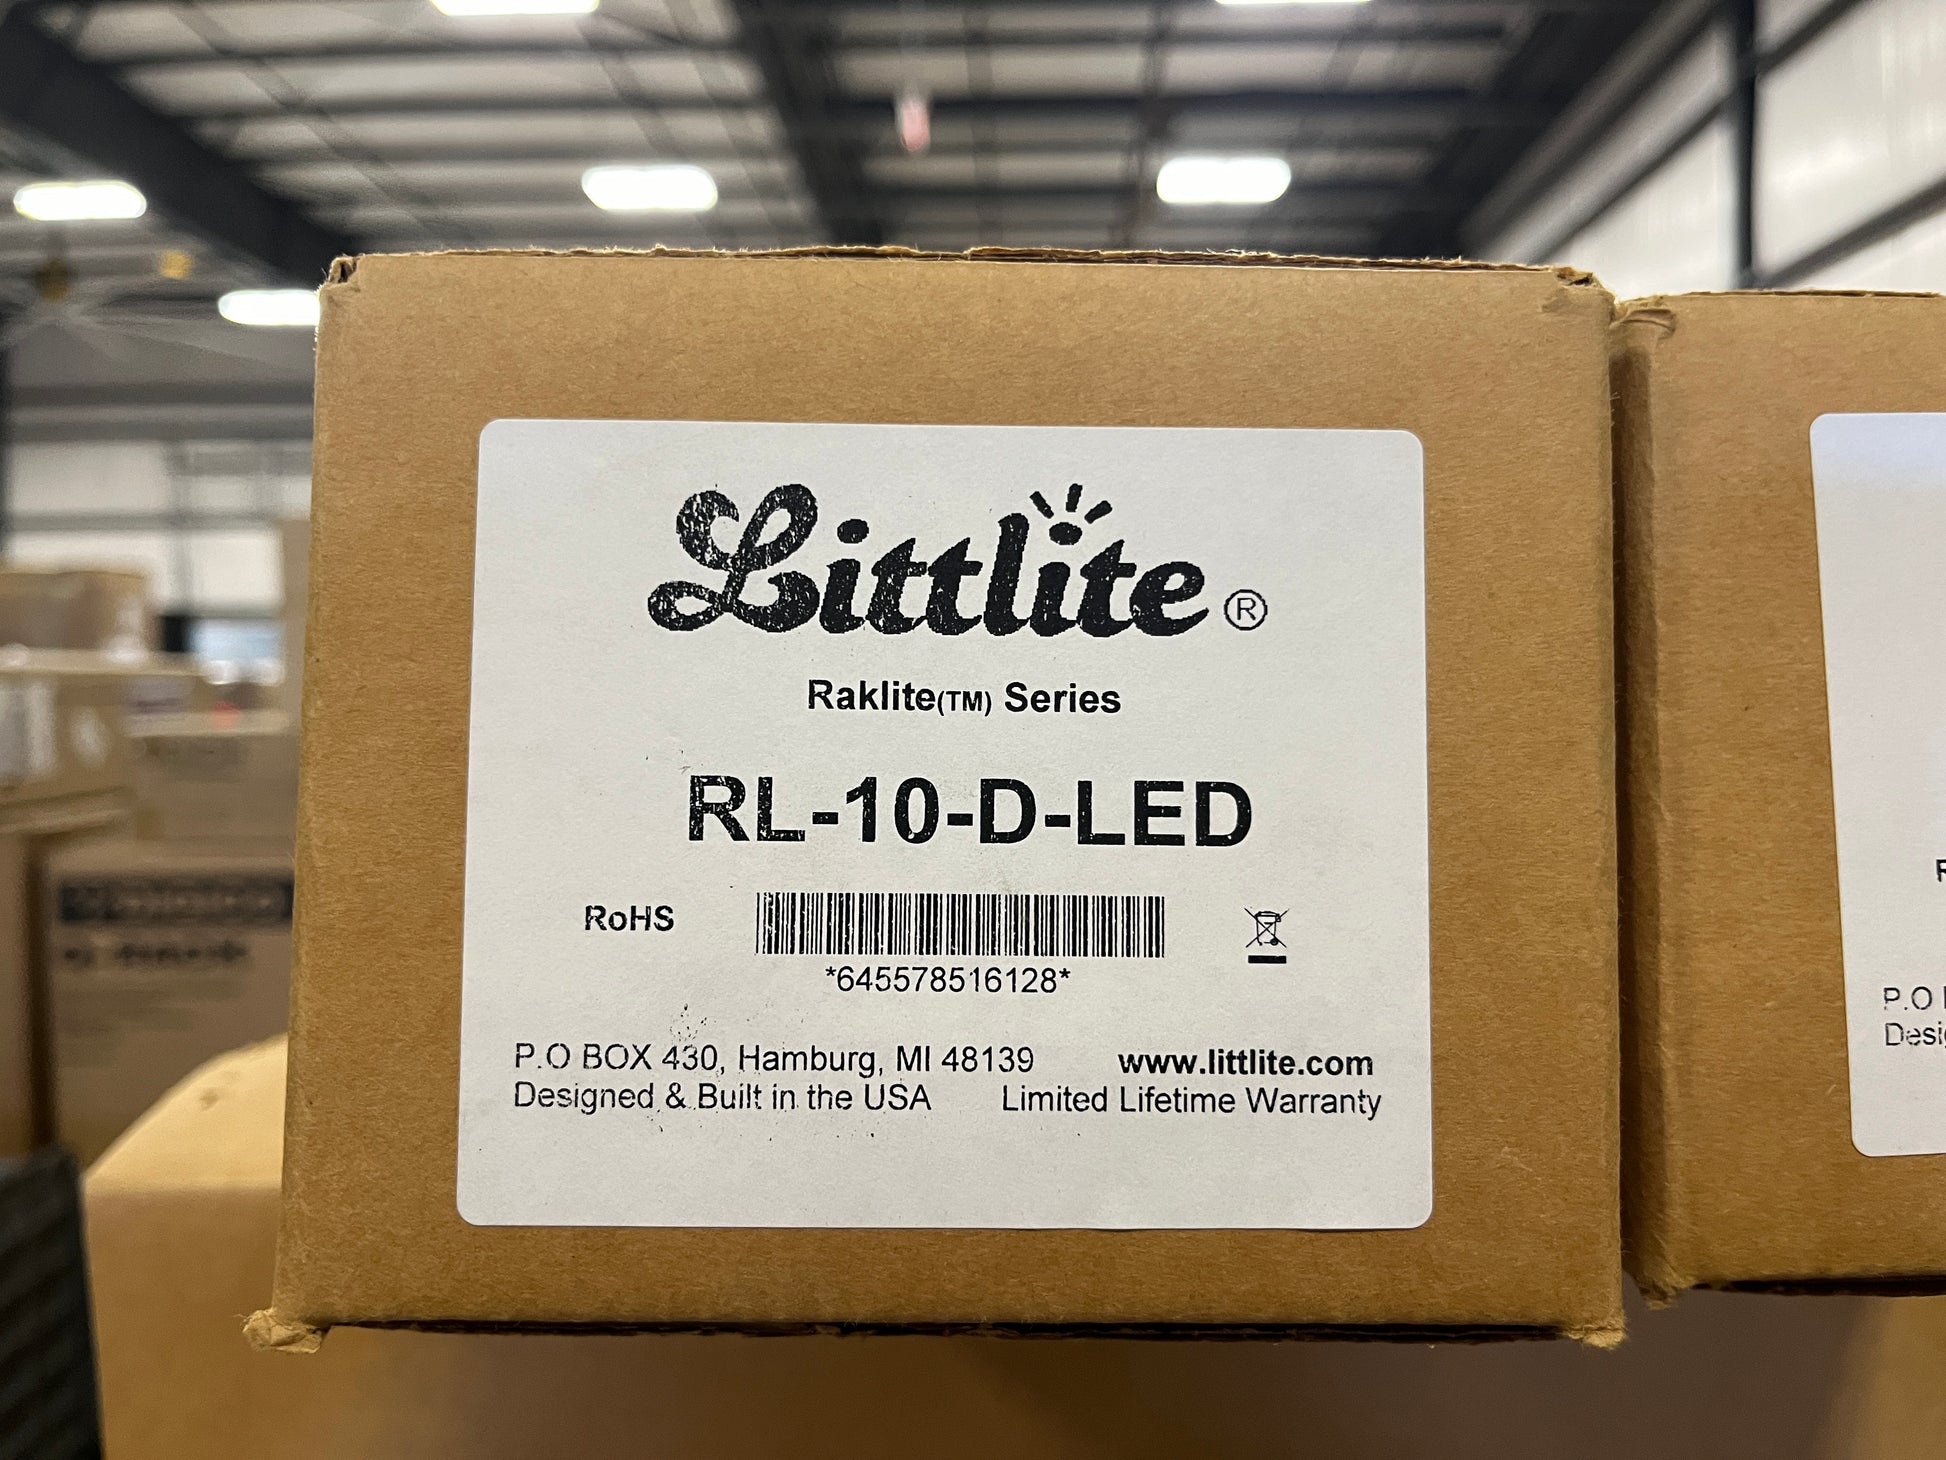 New Littlite Raklite Double LED Light, RL-10-D-LED, New In Box for Sale. We Sell Professional Audio Equipment. Audio Systems, Amplifiers, Consoles, Mixers, Electronics, Entertainment, Sound, Live.